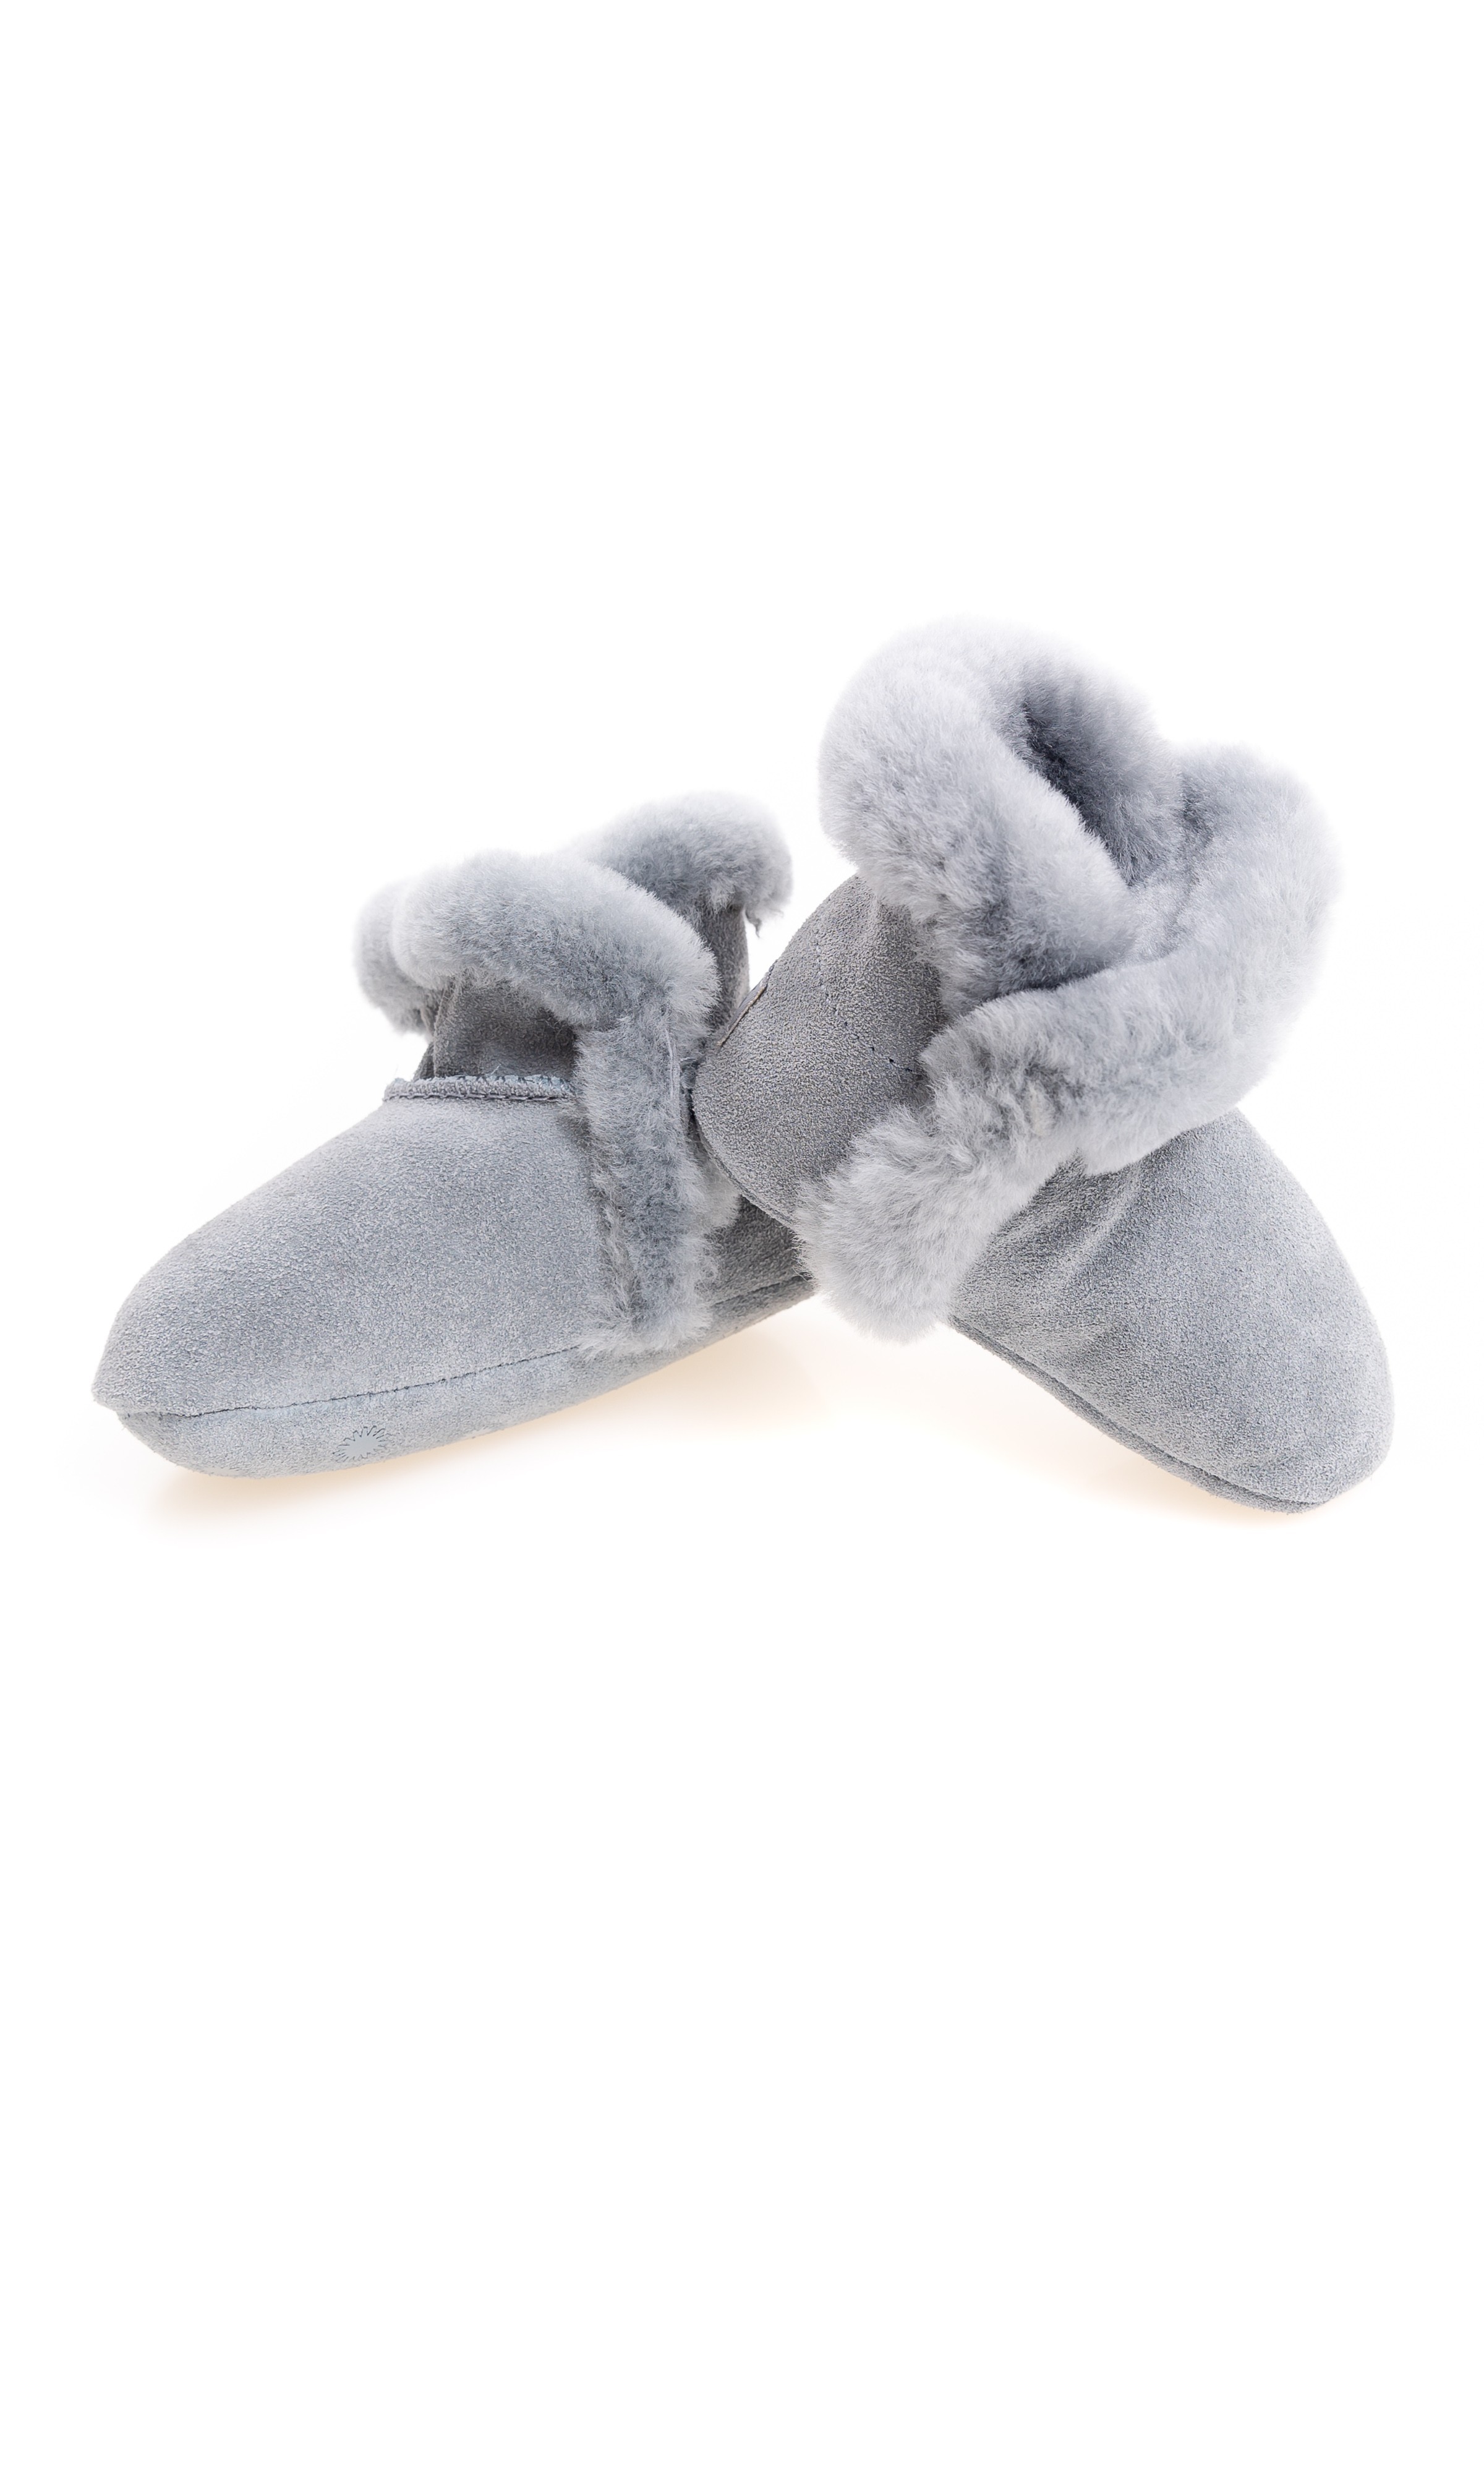 Gray baby boots, UGG - Celebrity-Club